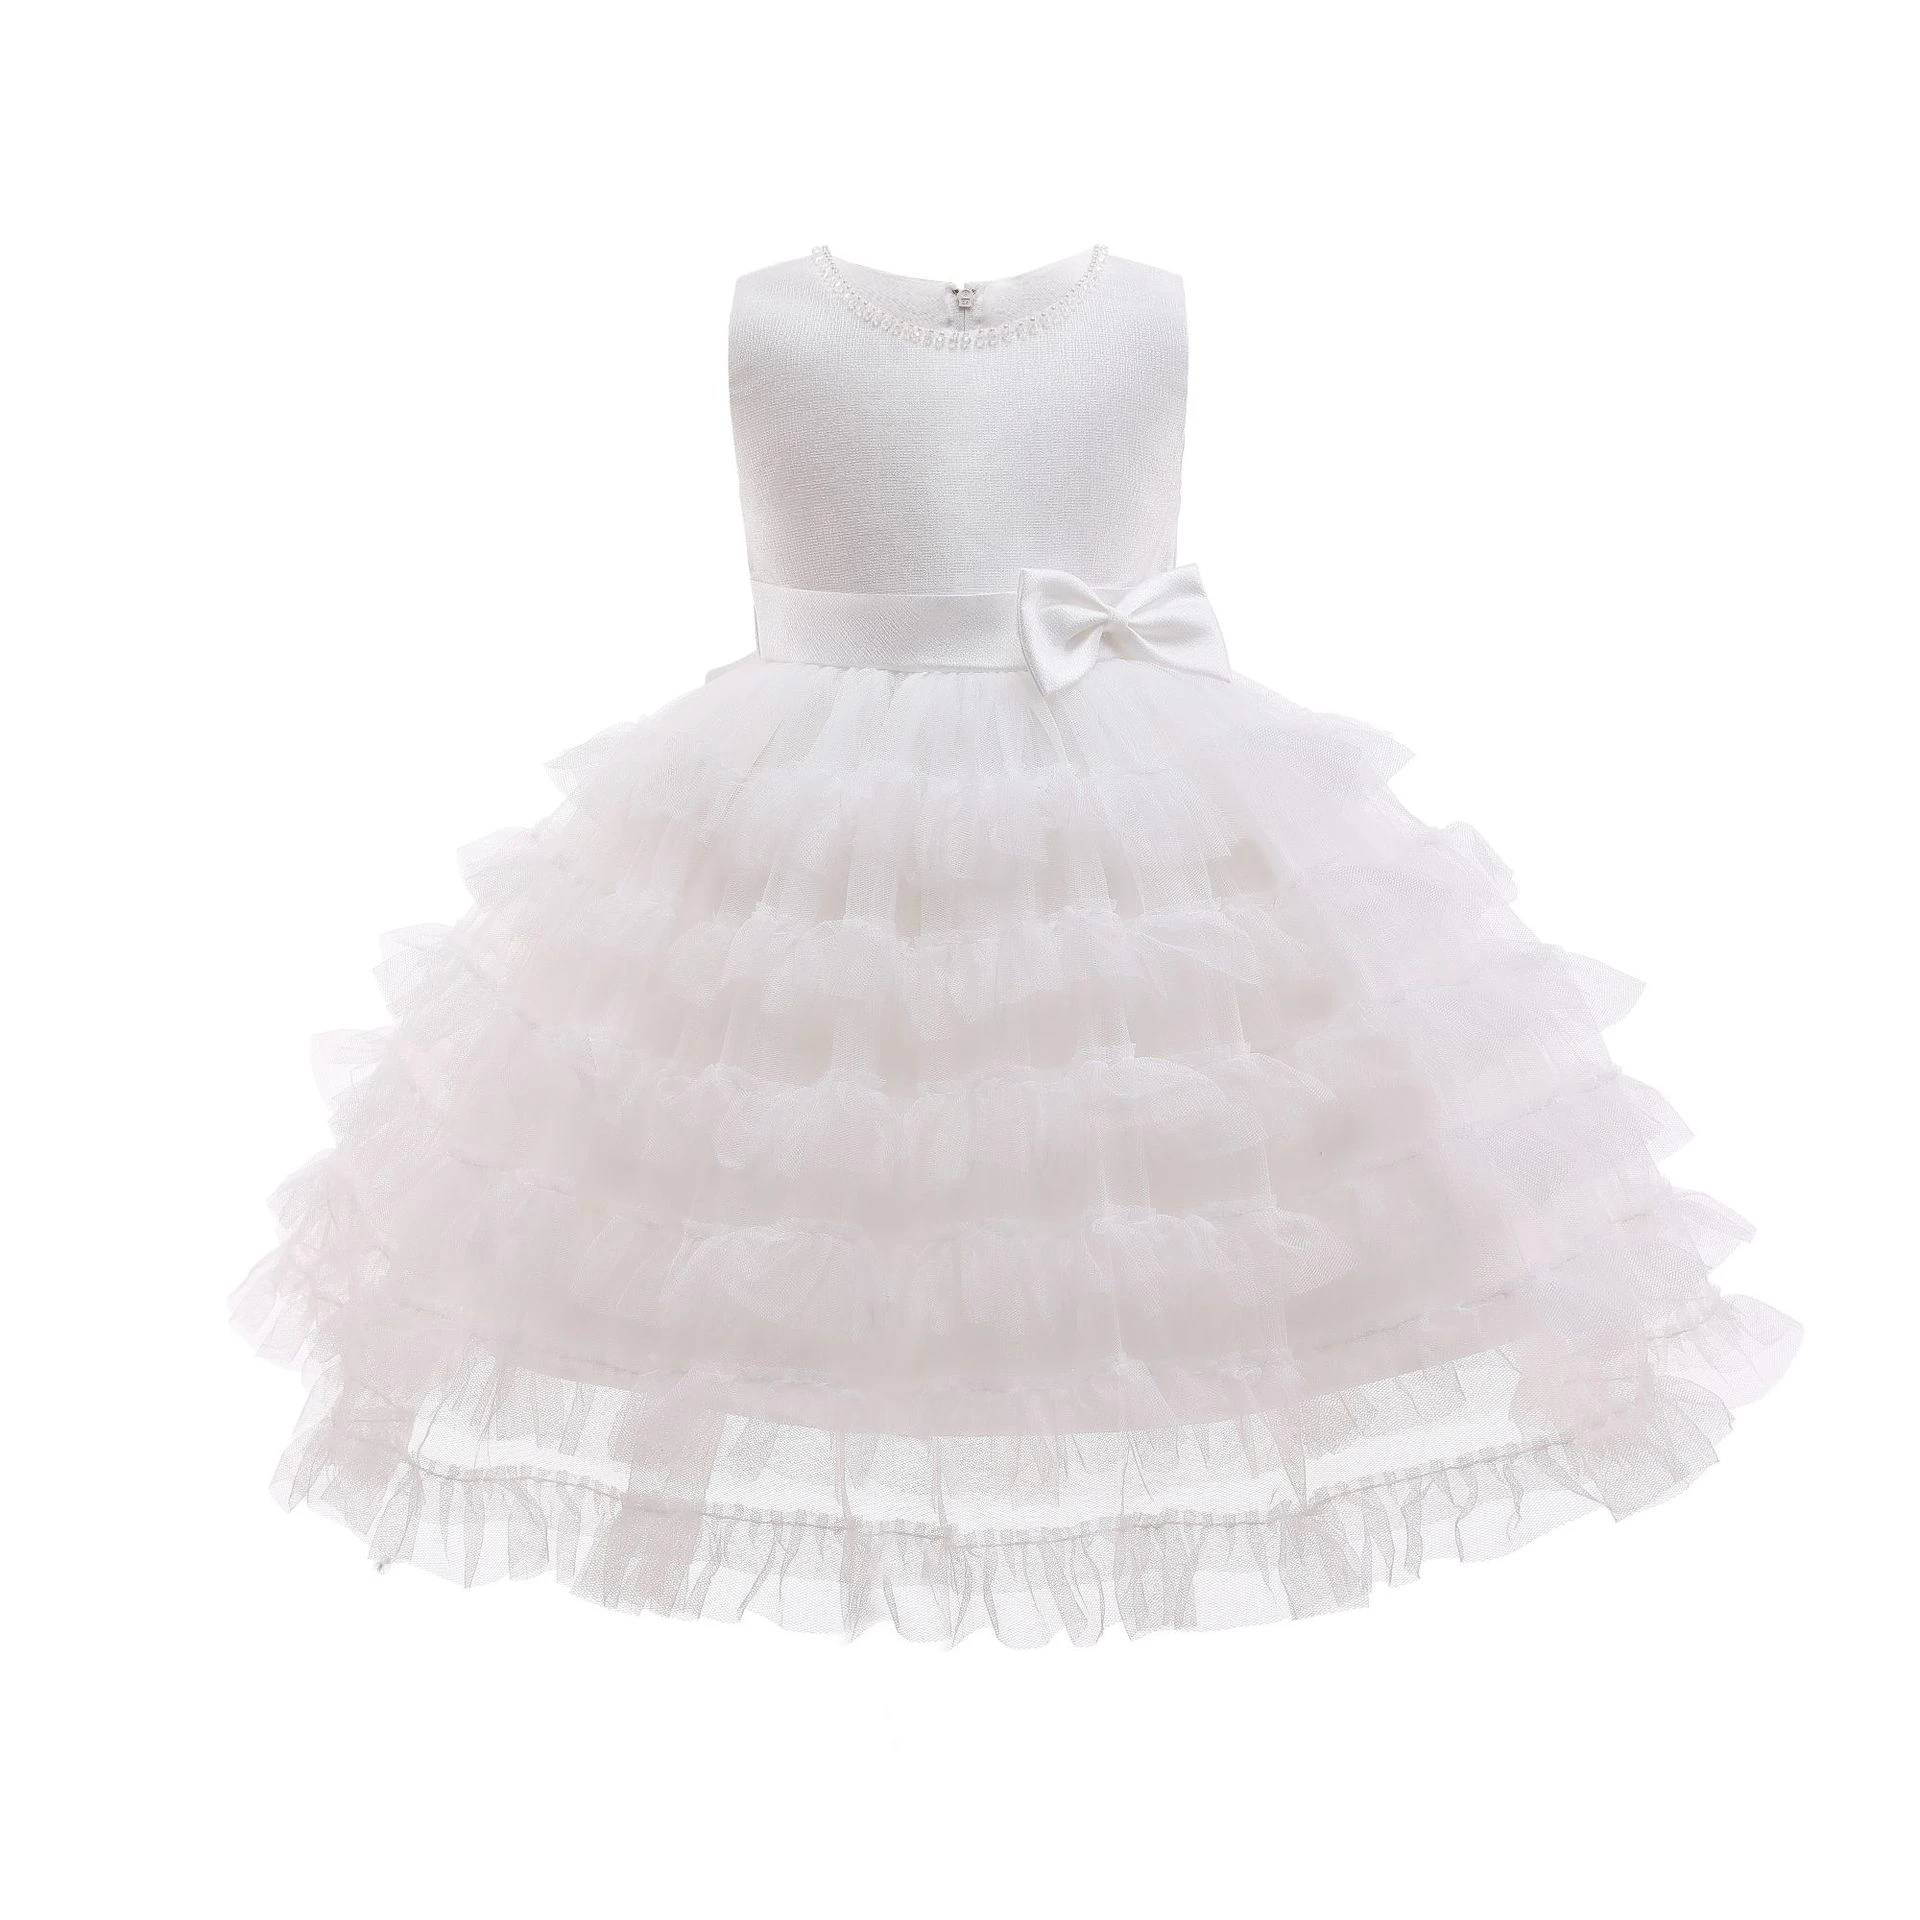 HF019  Baby Frock Design Pictures Kids Party Wear  1 Year Old First Birthday Fashion Cake Layered Dress